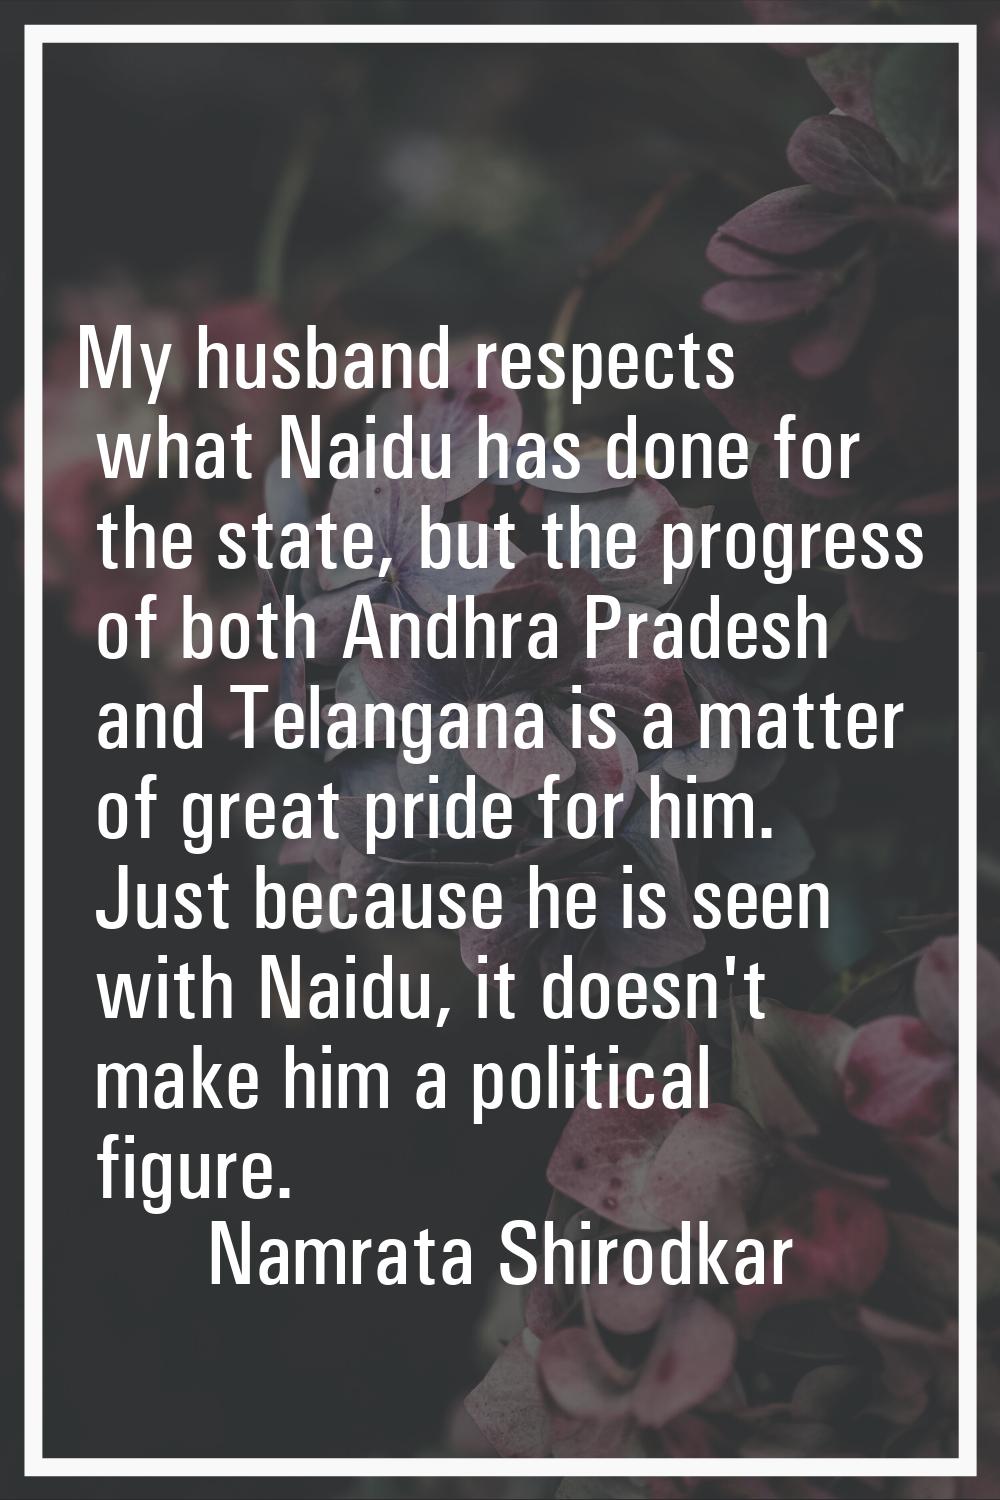 My husband respects what Naidu has done for the state, but the progress of both Andhra Pradesh and 